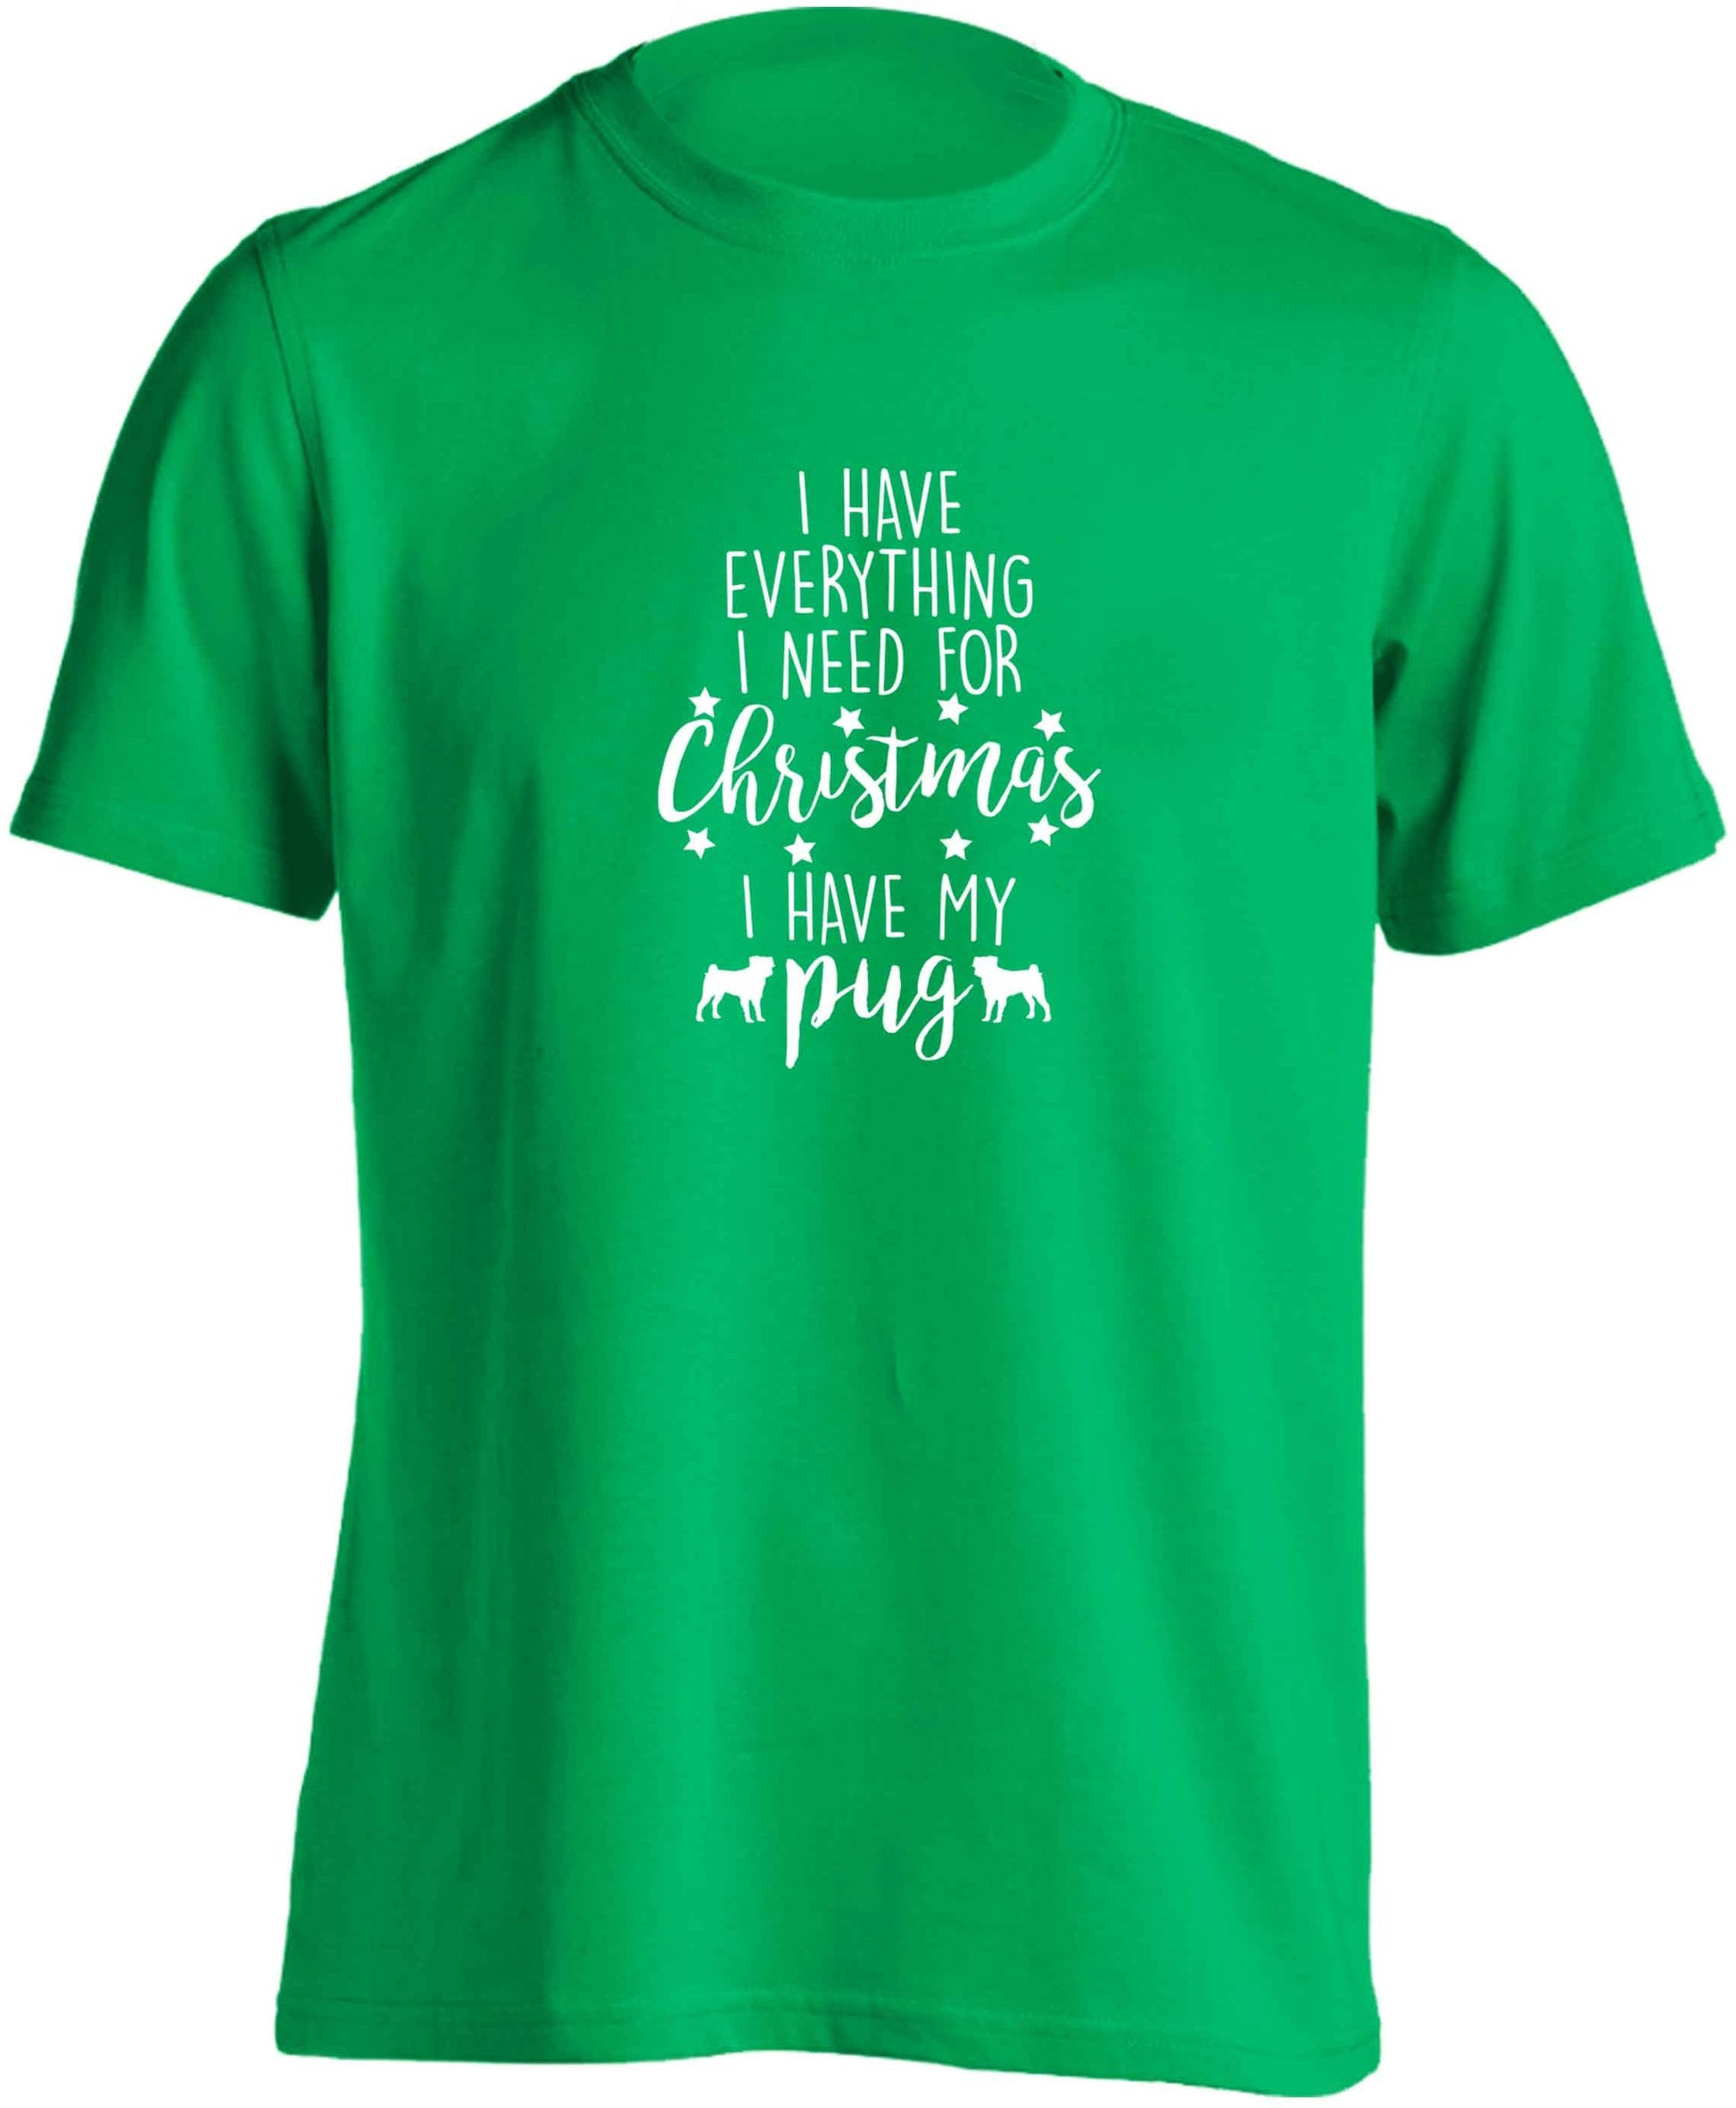 I have everything I need for Christmas I have my pug adults unisex green Tshirt 2XL